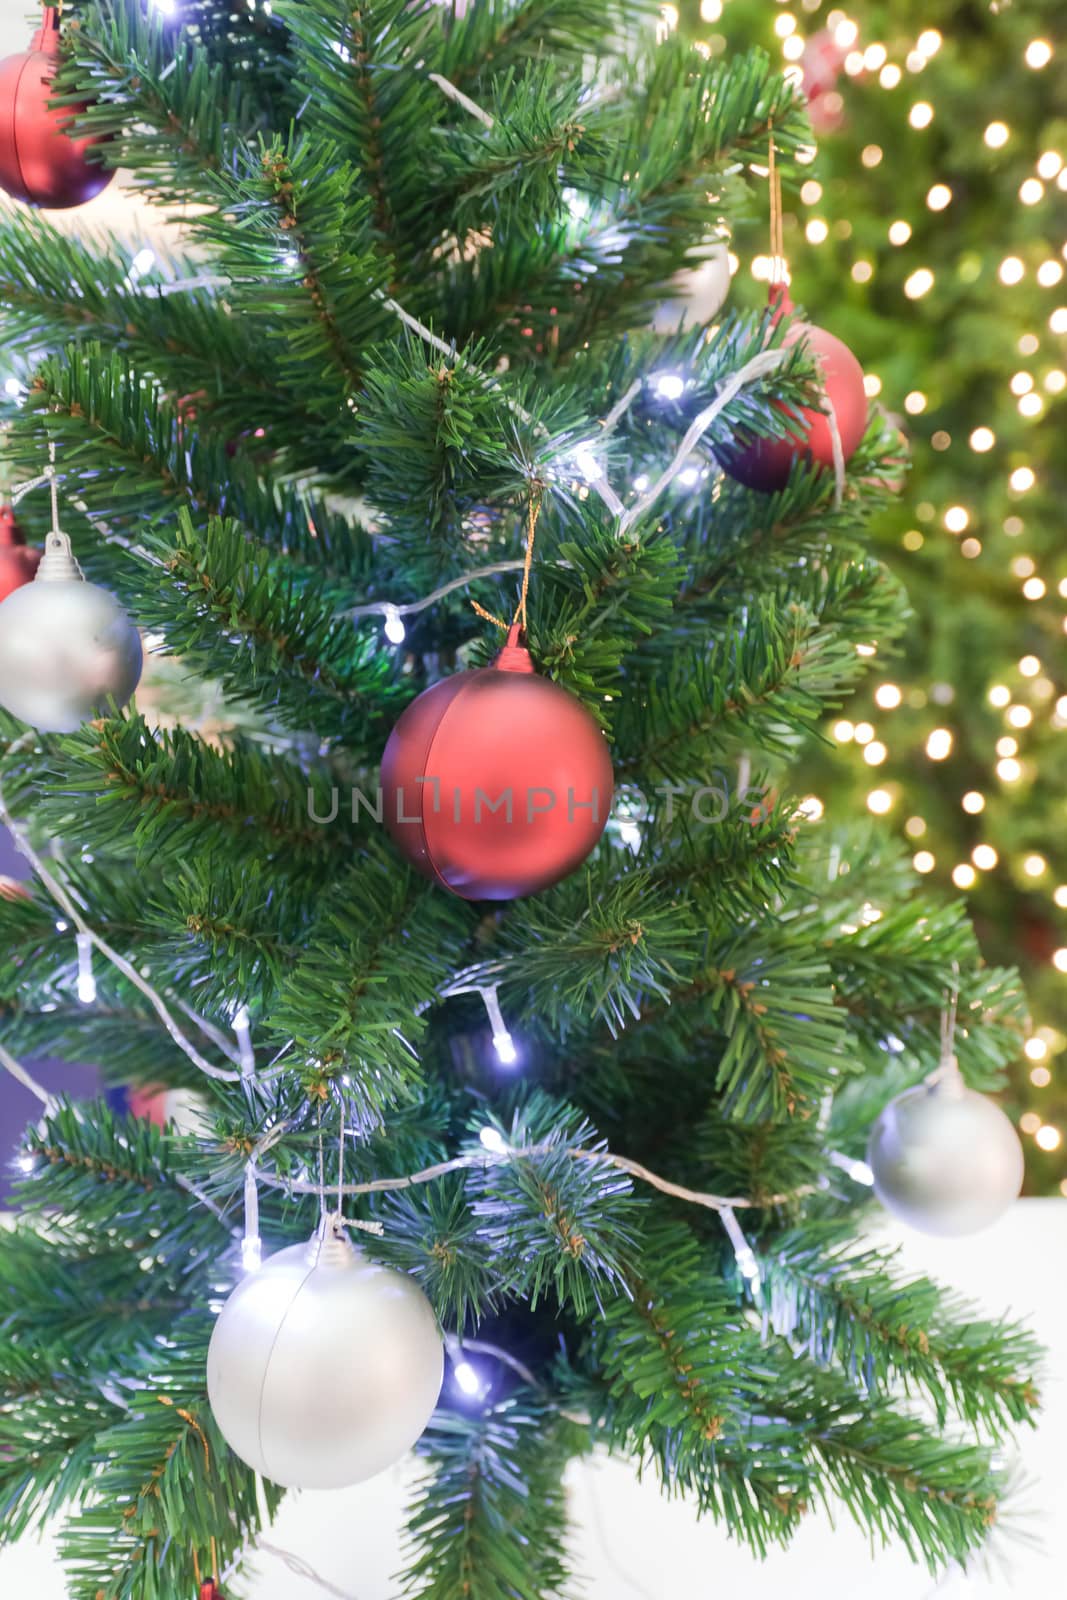 Background image of a Christmas tree decorated with lights